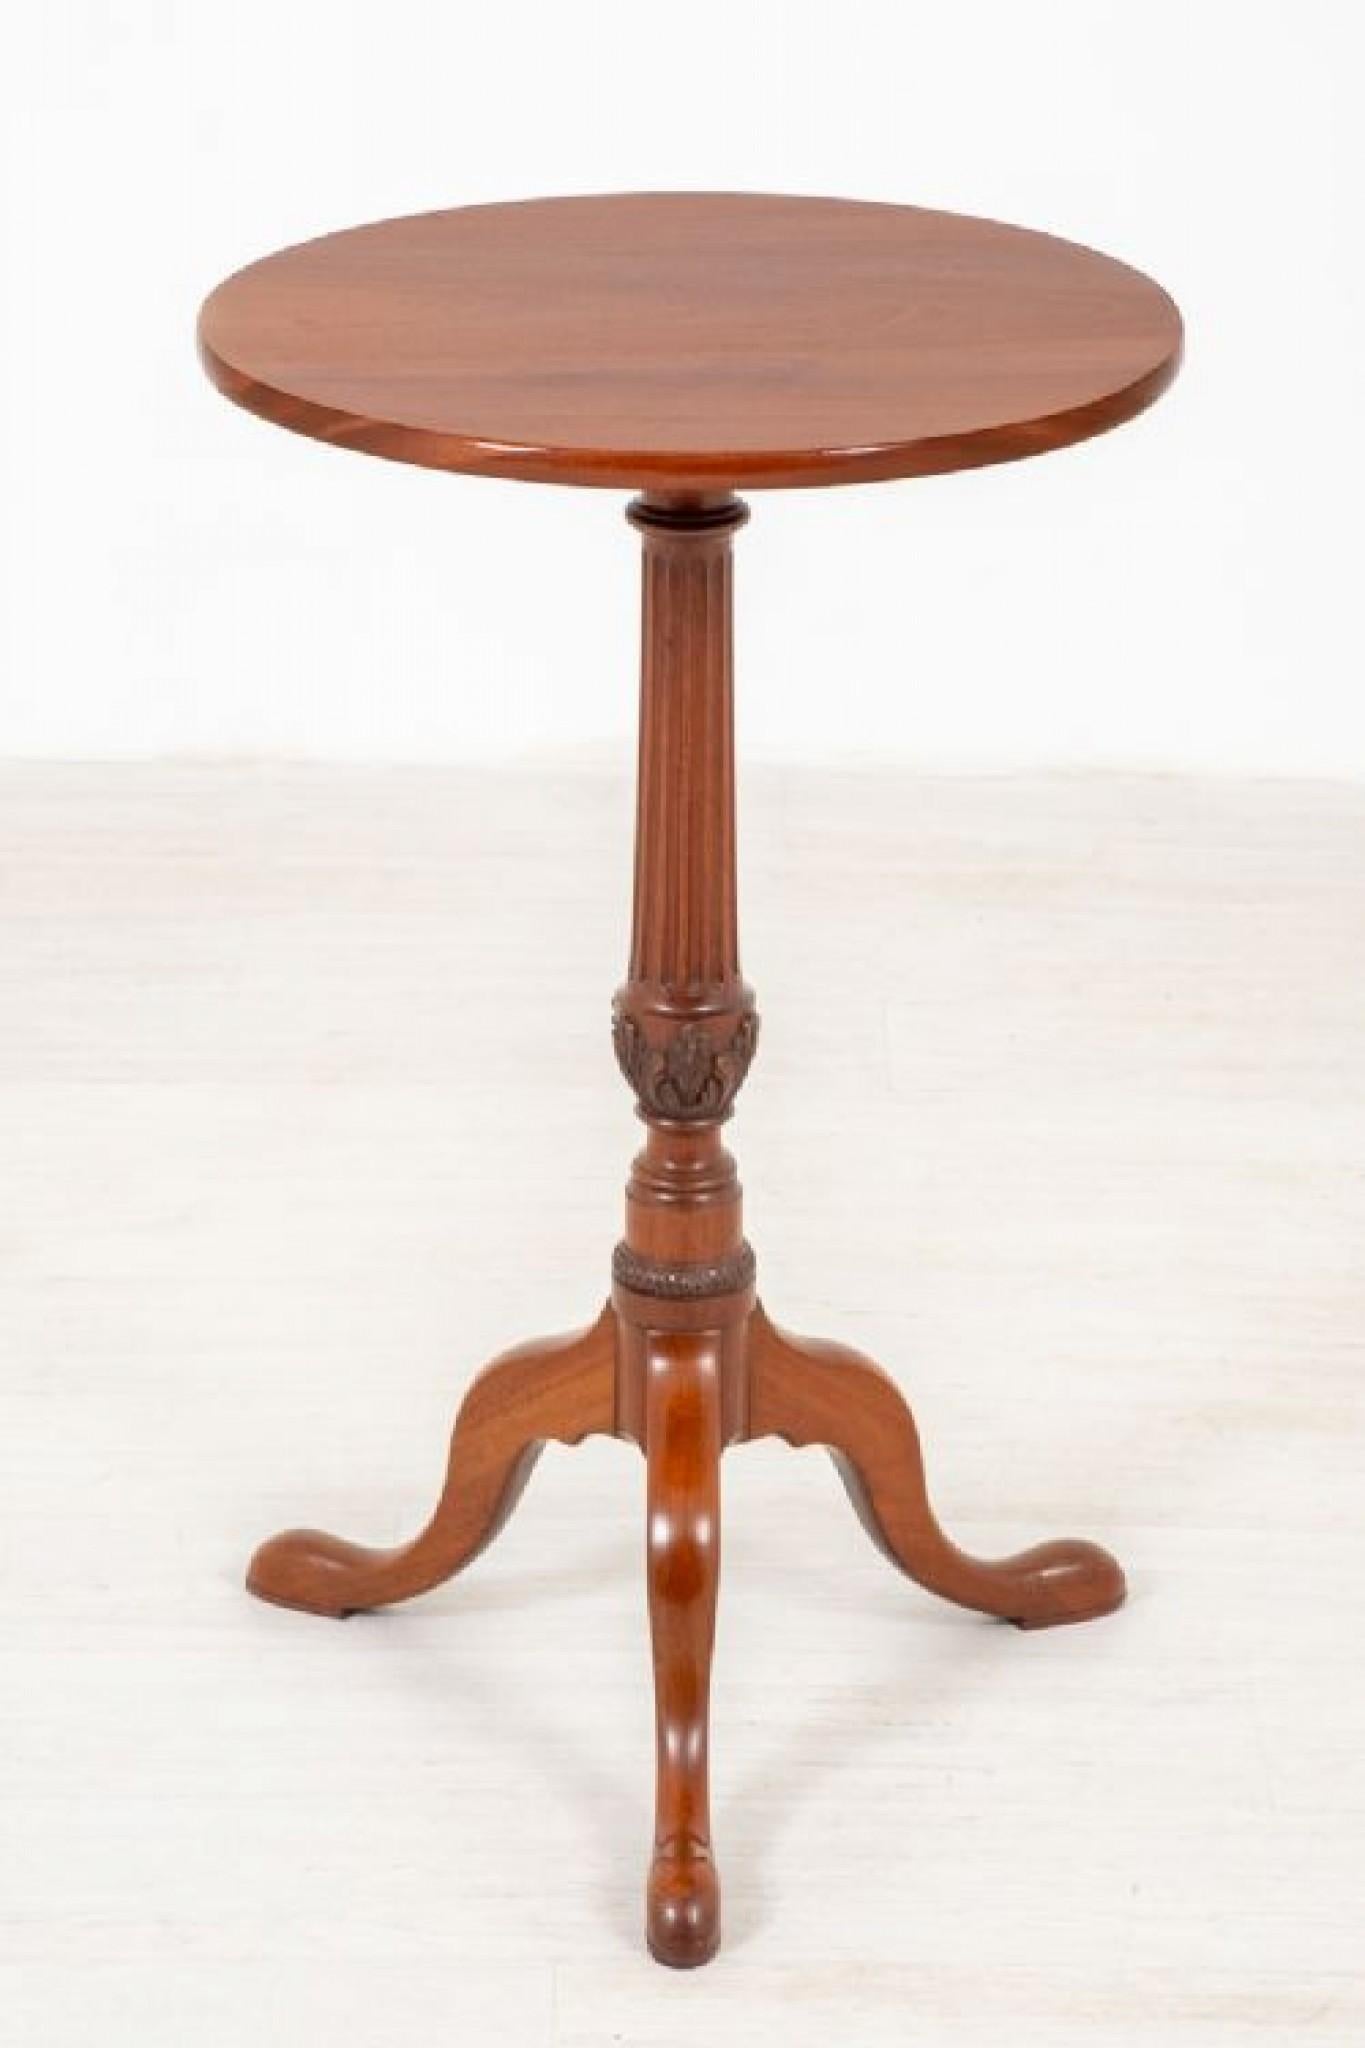 Georgian style mahogany wine table.
Standing upon typical georgian style swept legs with pad feet.
circa 1900.
The ring turned and fluted column featuring carve acanthus leaves.
The one piece mahogany top having an interesting grain.
This table